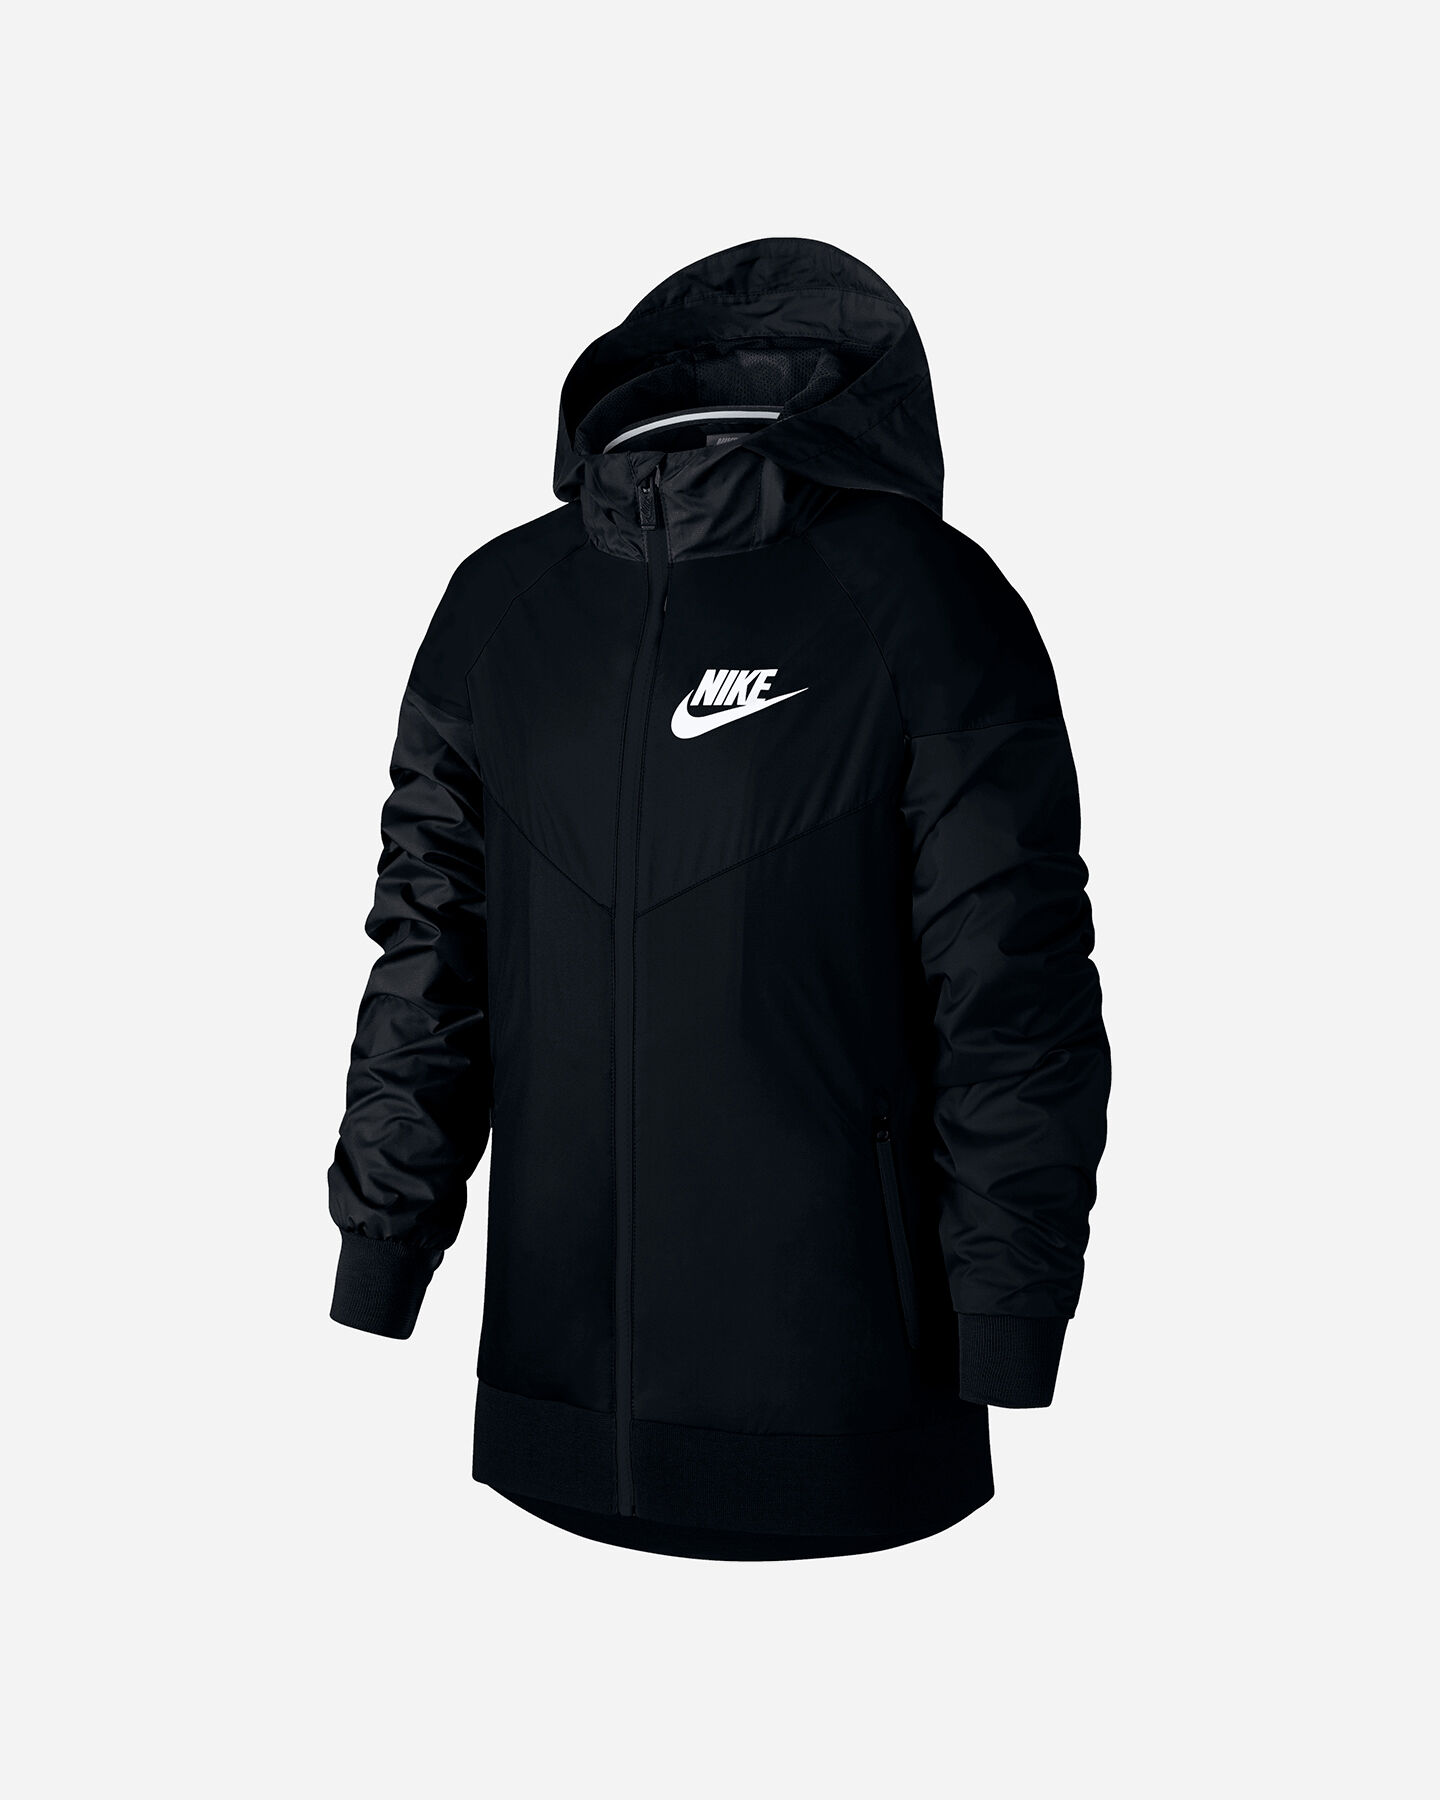  Giubbotto NIKE RIPSTOP POLY JR S2016585|011|XL scatto 0